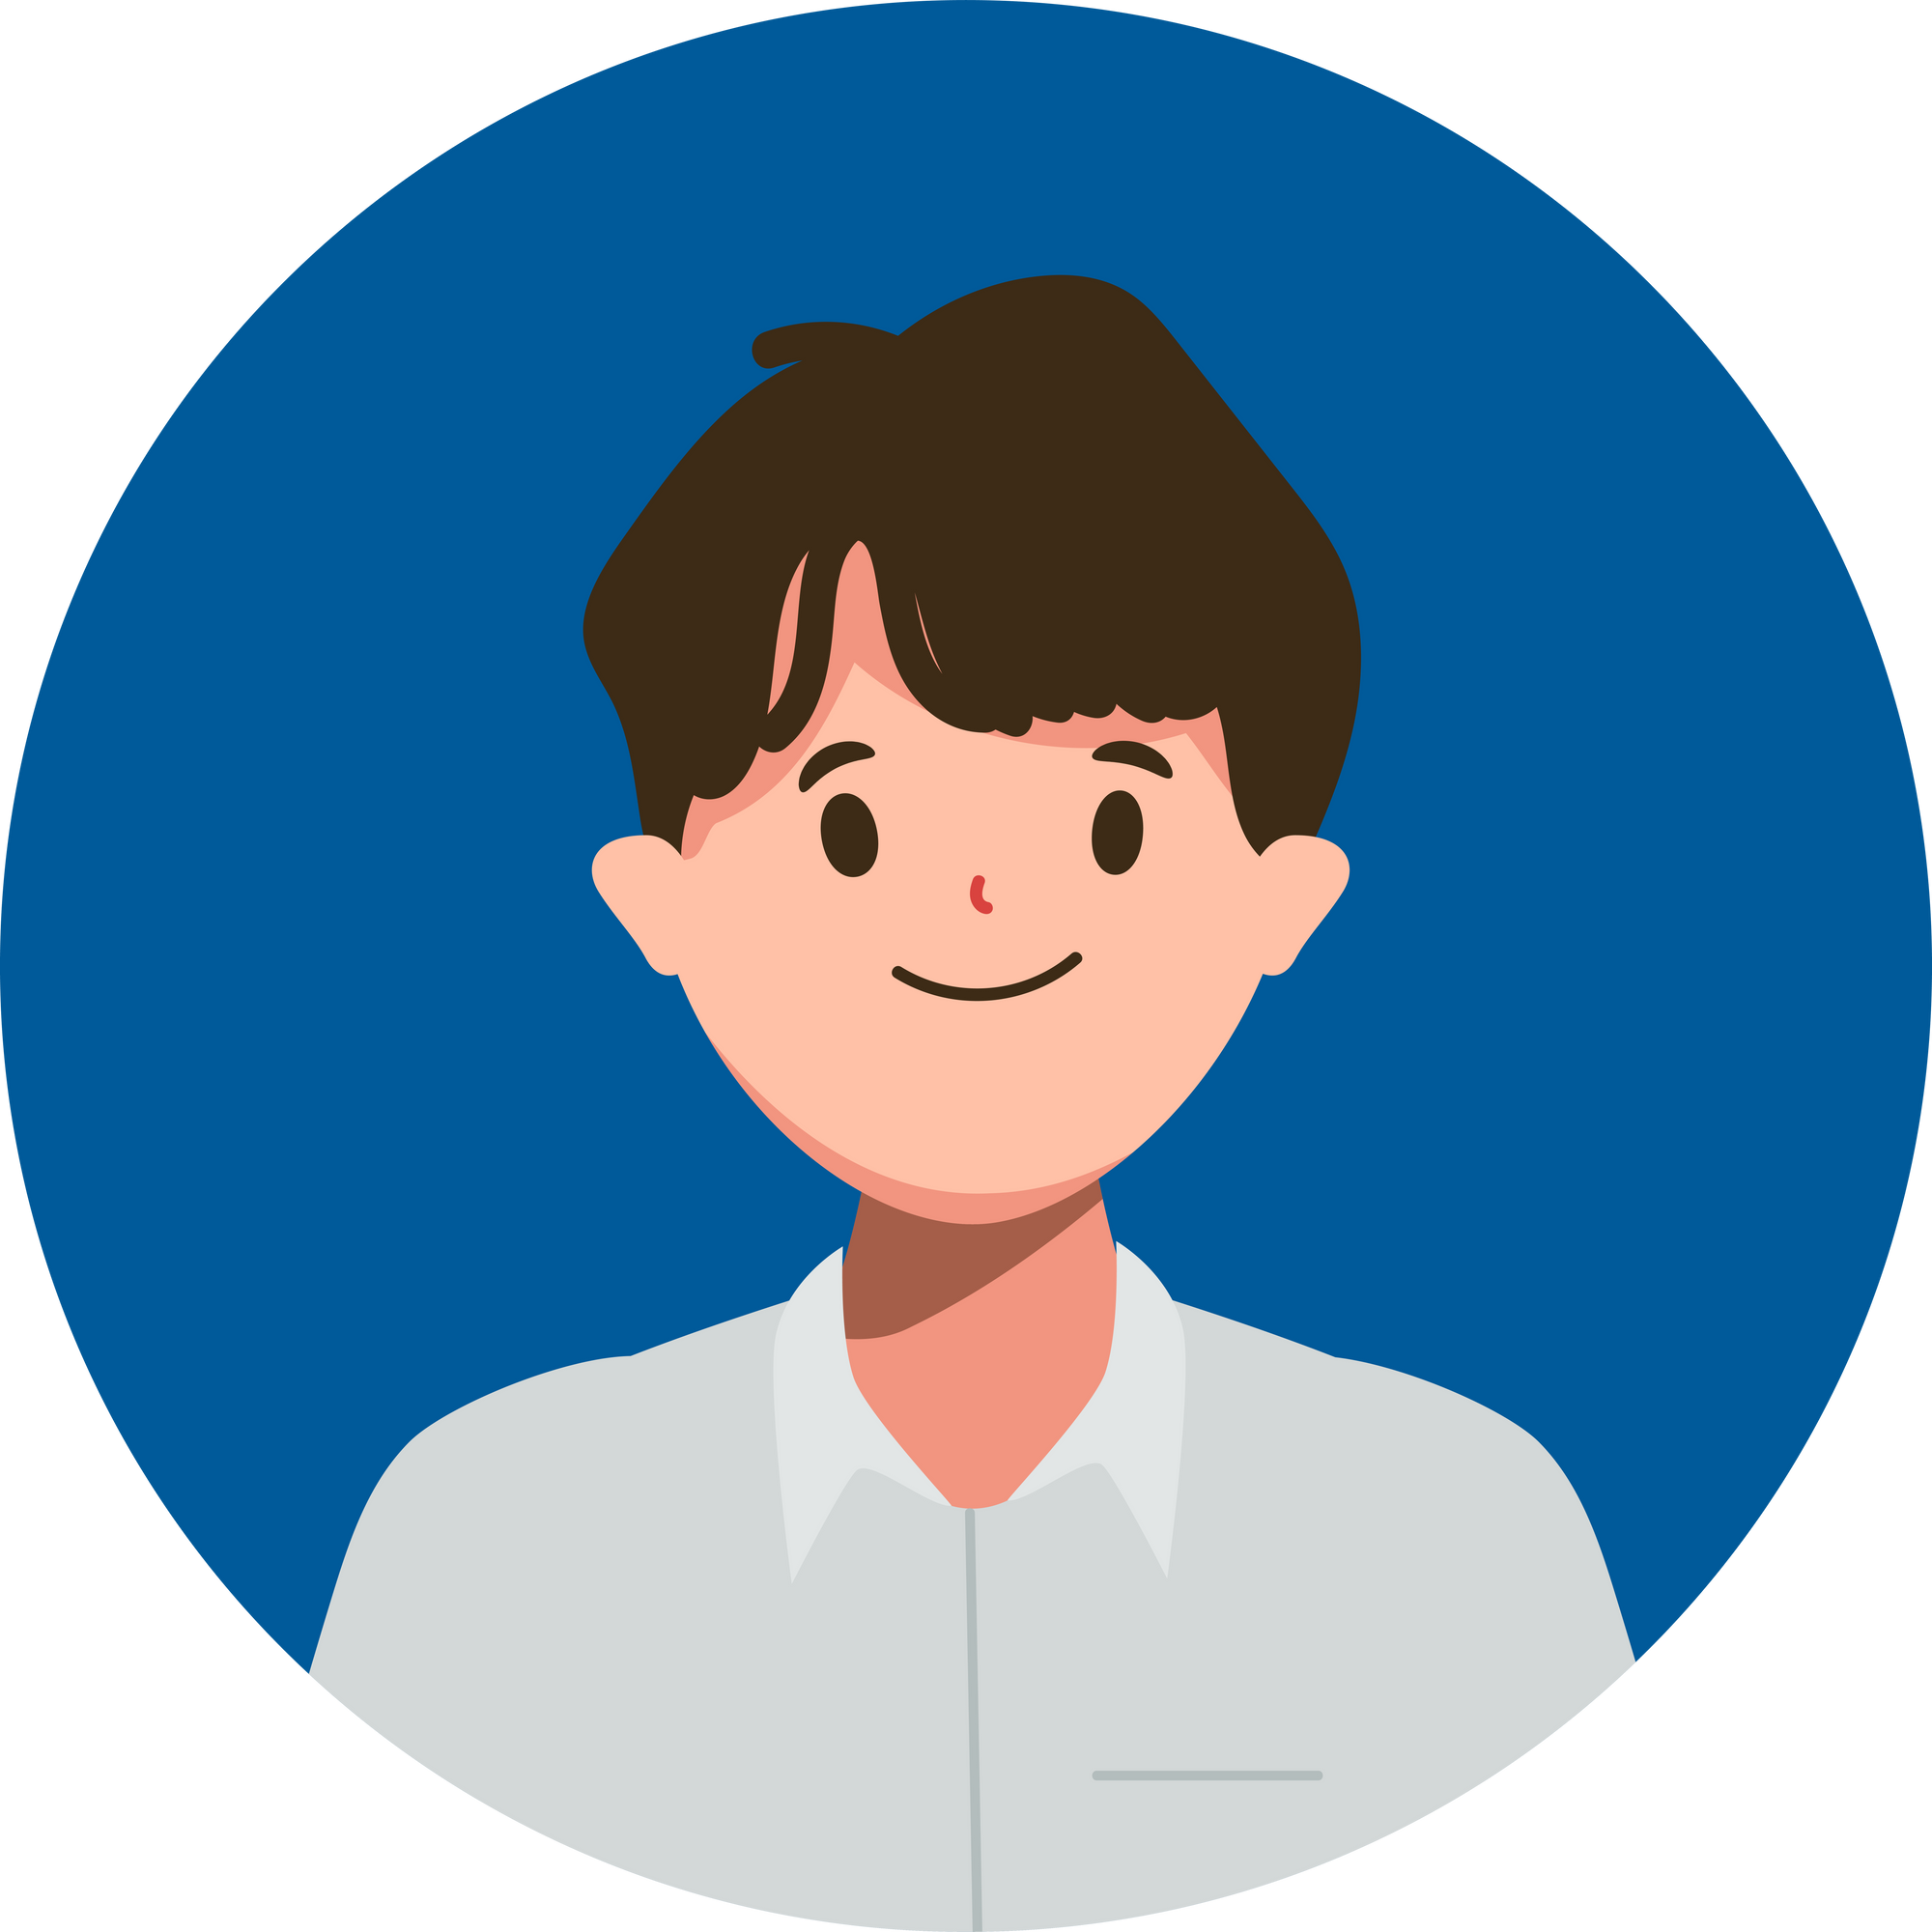 Man profile picture in circle clipart element character.